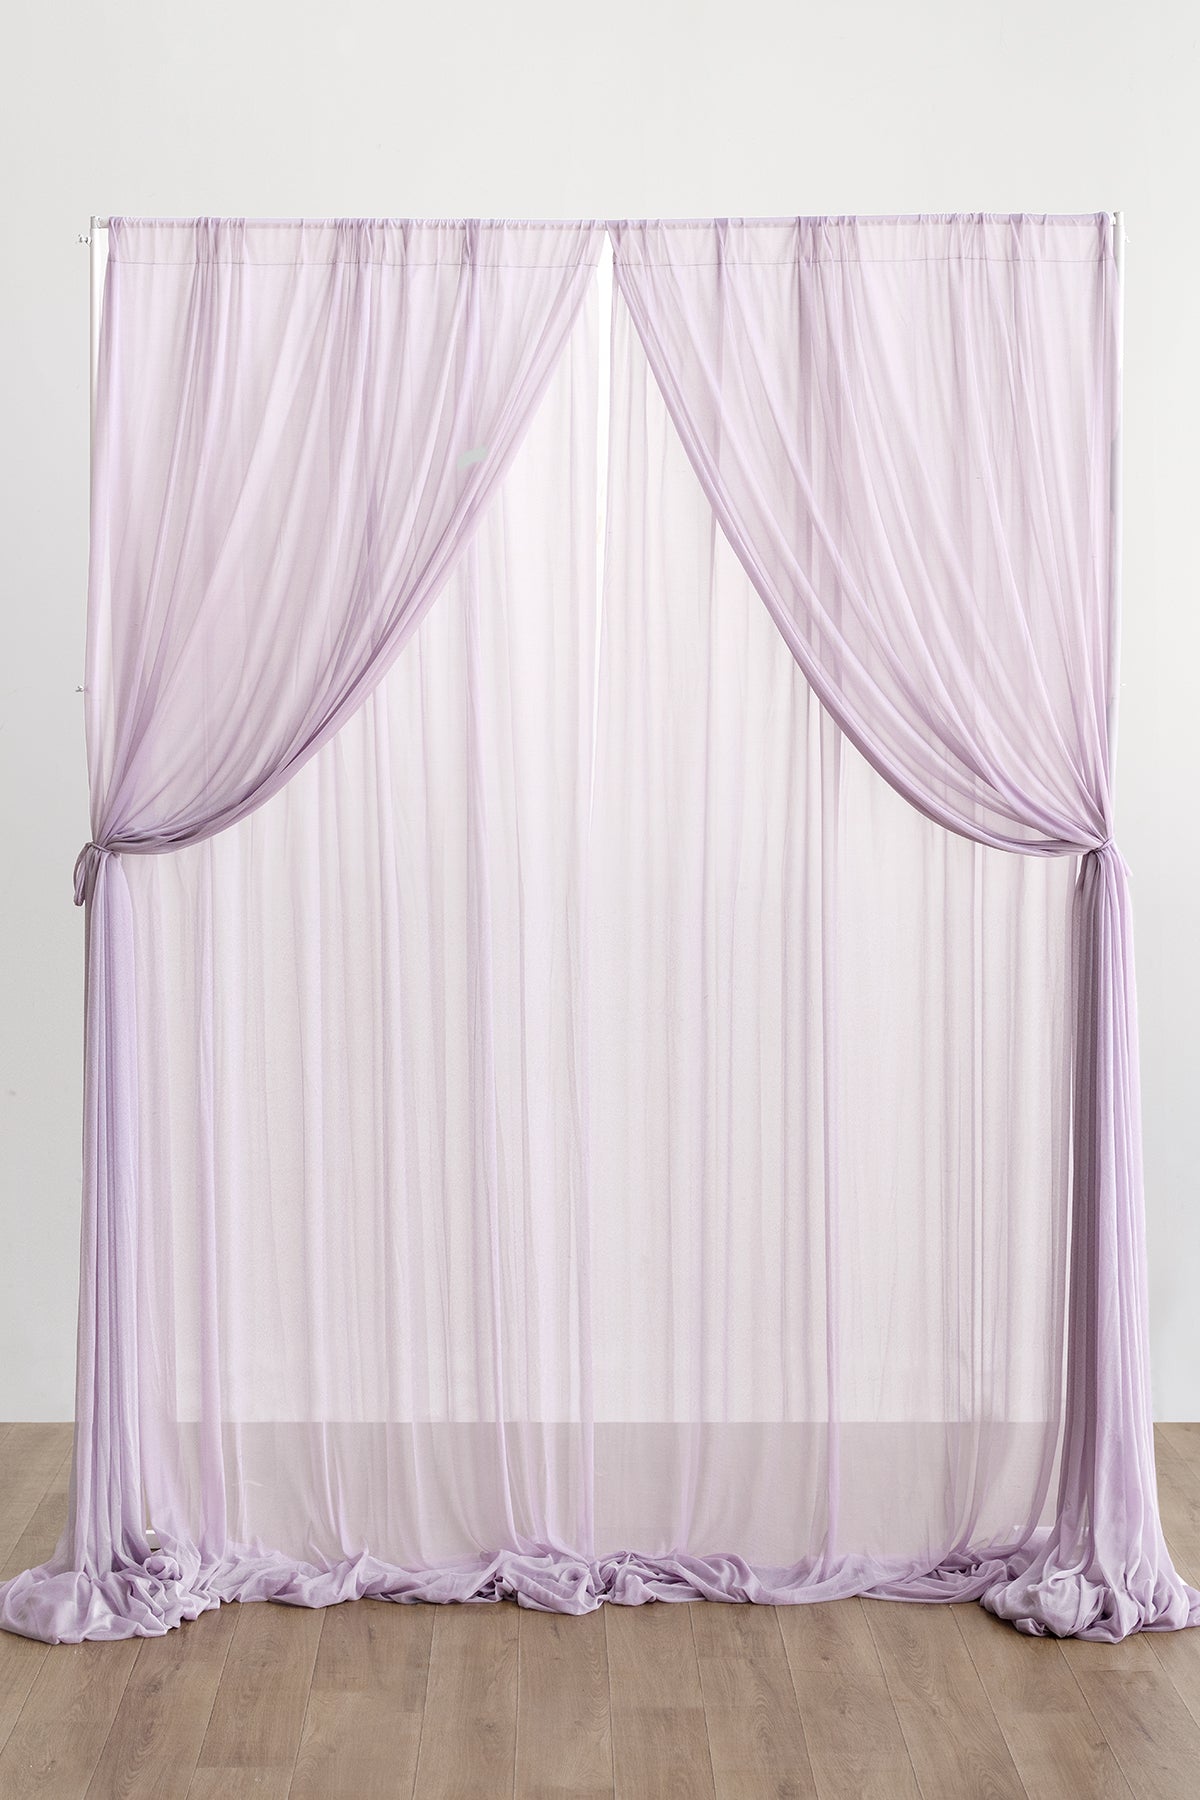 2-Layer Wedding Backdrop Curtains 59" x 10ft (Set of 2) - 6 Colors | Limited-Time